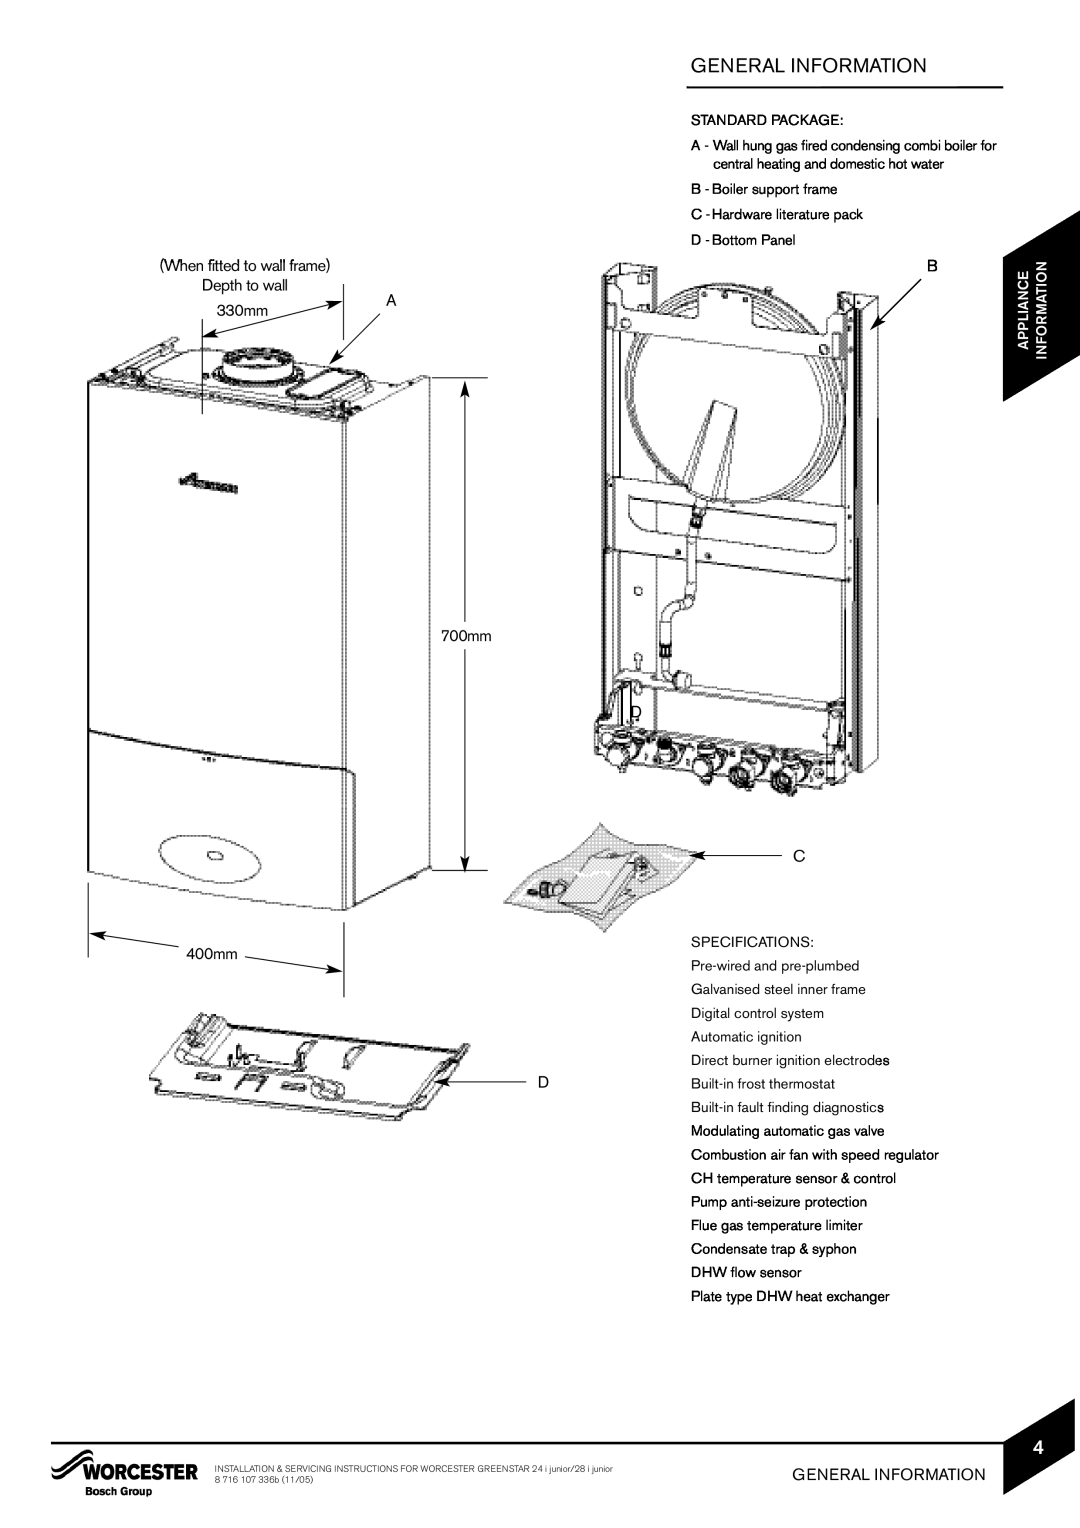 Bosch Appliances 24i junior manual General Information, When fitted to wall frame Depth to wall 330mm 400mm, B 700mm D C 